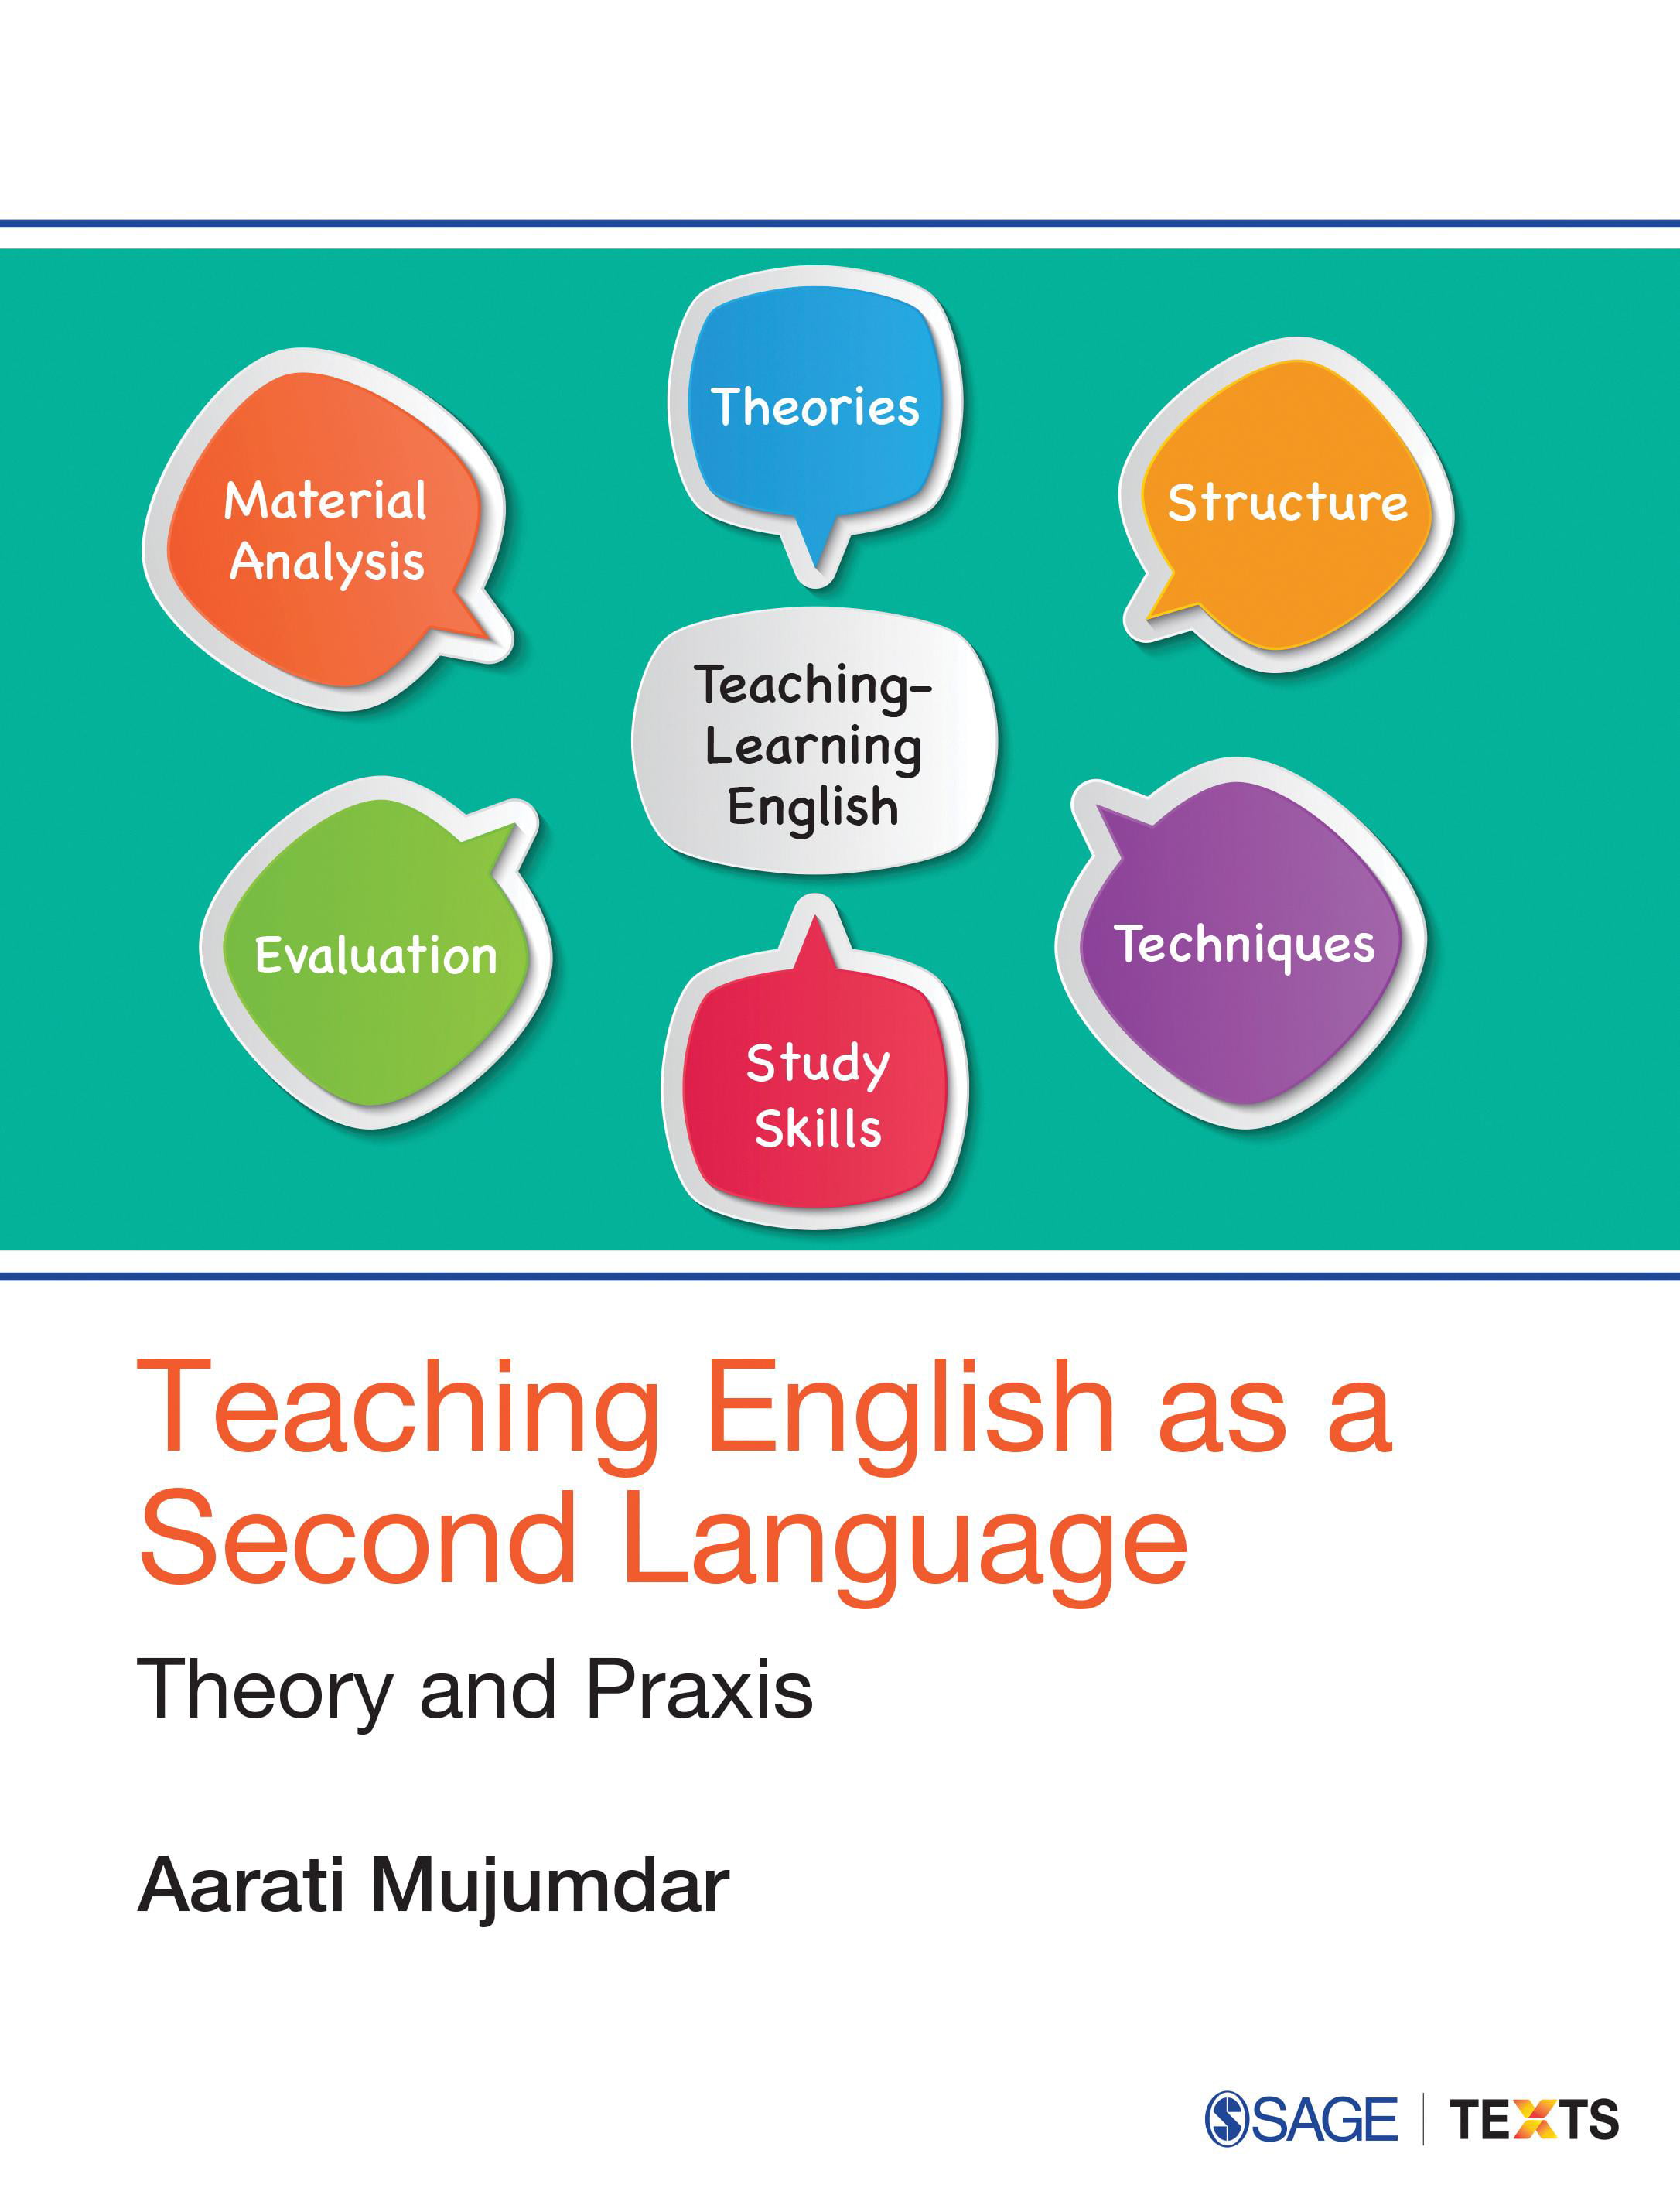 teaching-english-as-a-second-language-theory-and-praxis-paperback-walmart